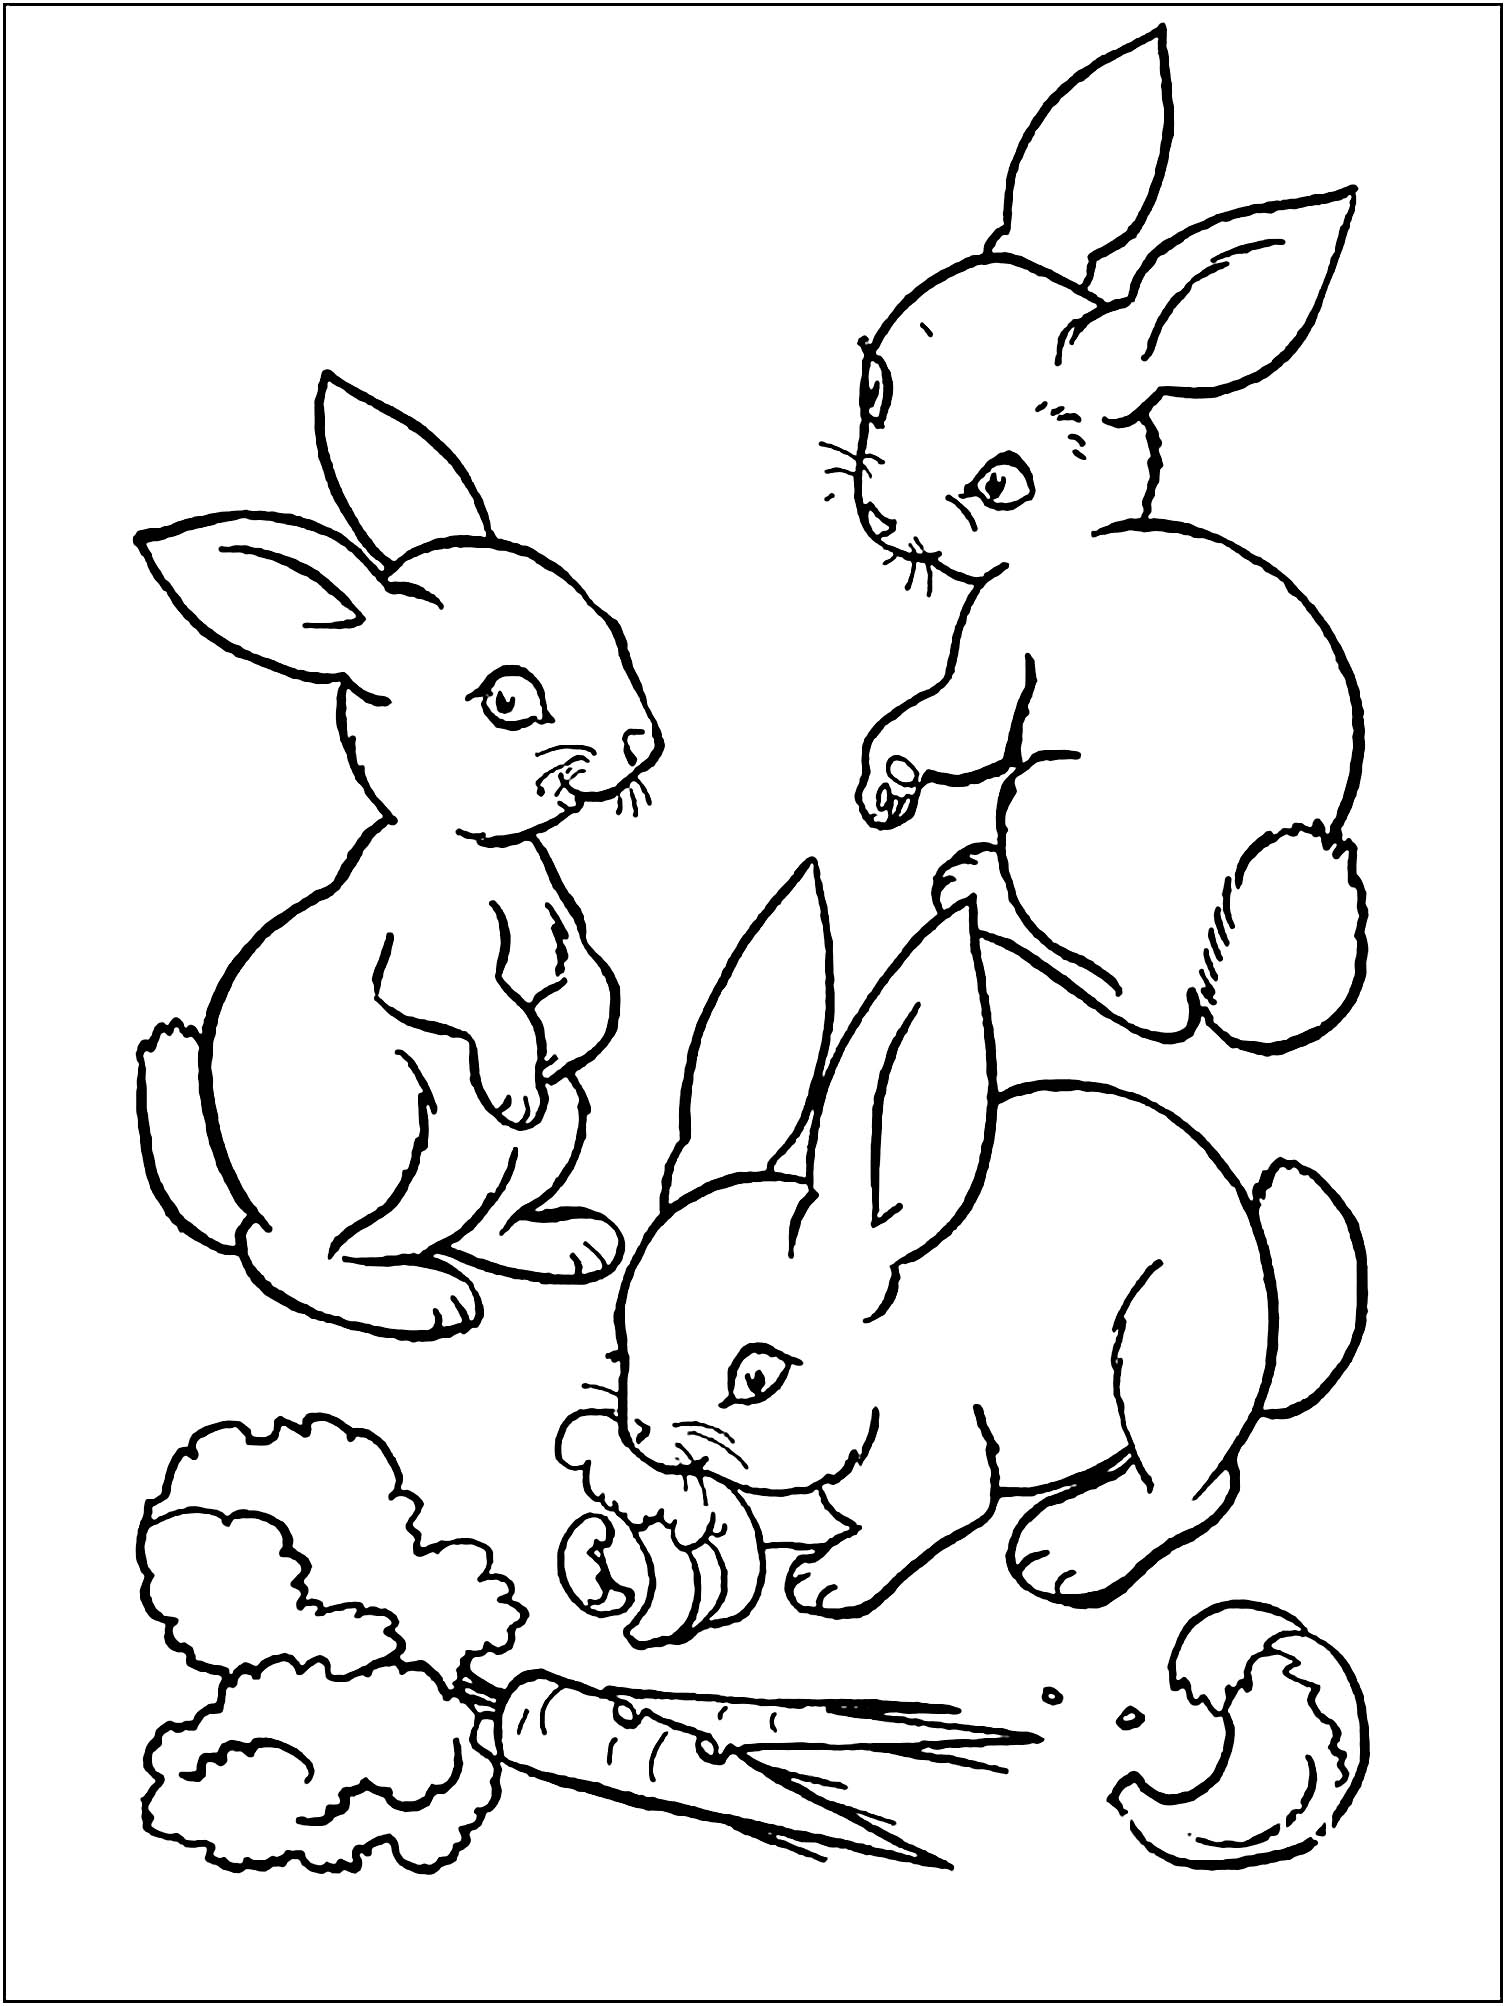 printable-rabbit-coloring-pages-for-kids-rabbit-kids-coloring-pages